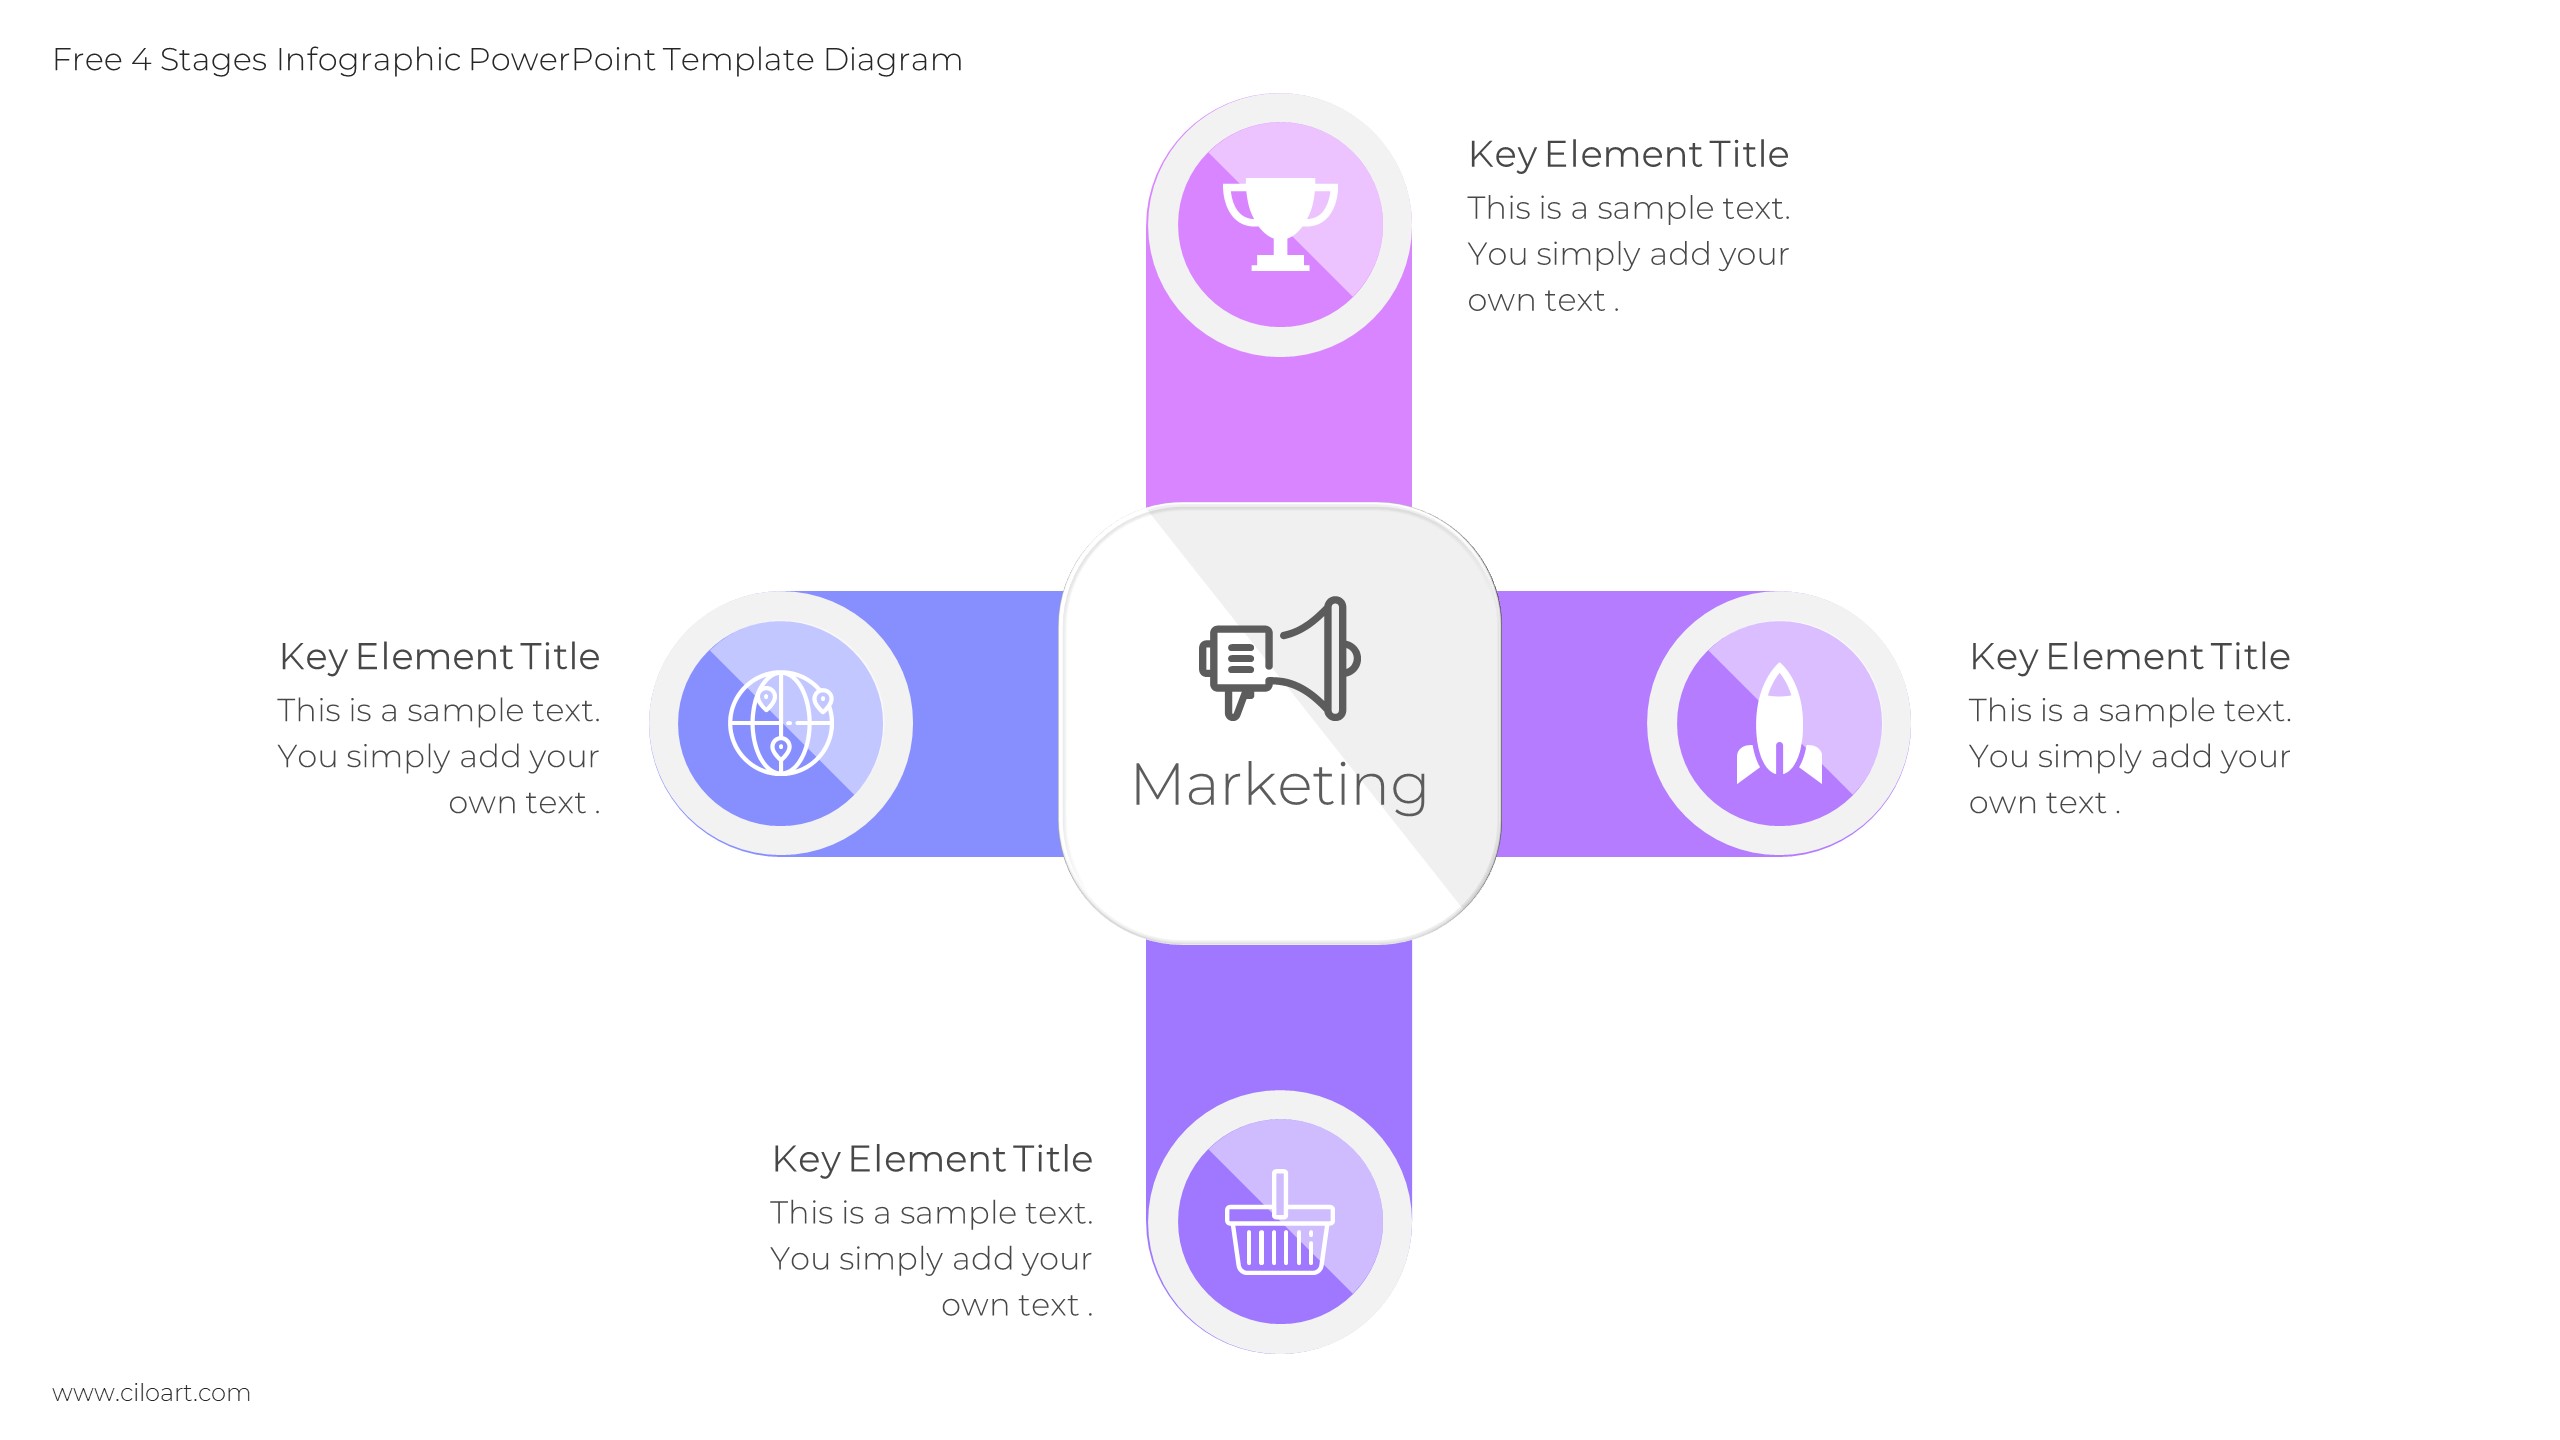 Free 4 Stages Infographic PowerPoint Template Diagram